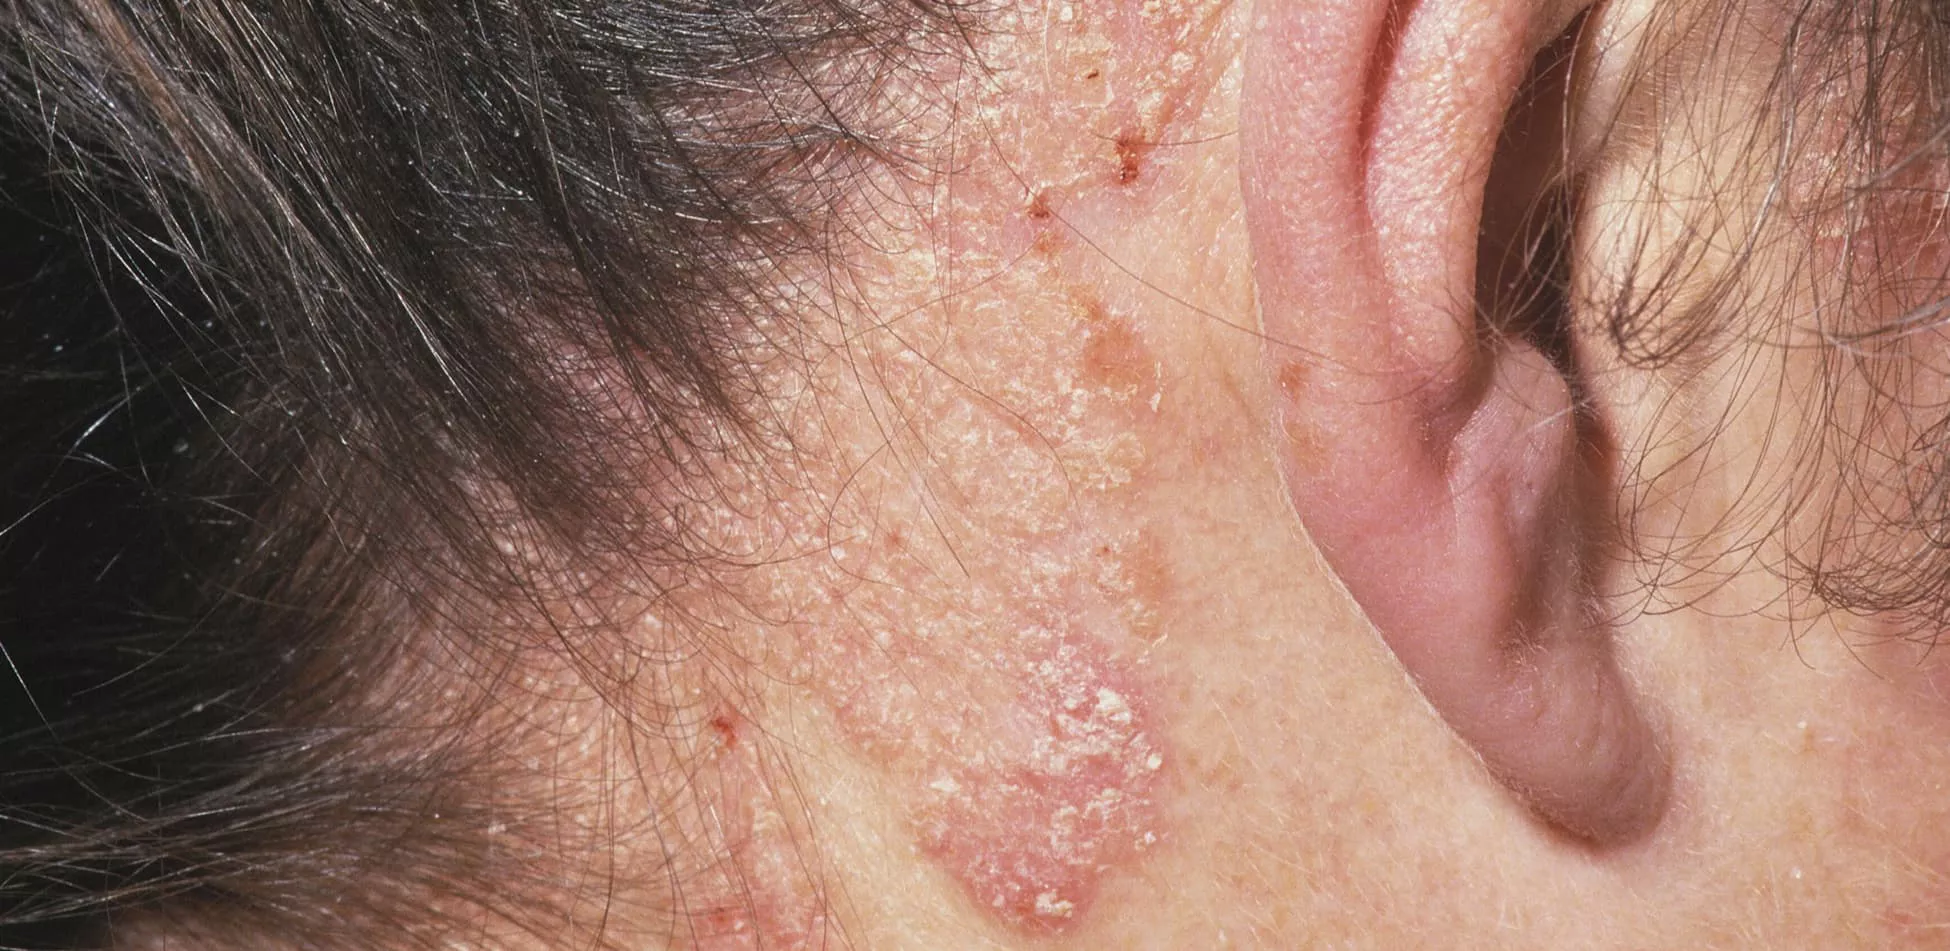 Picture of psoriasis on scalp behind ear